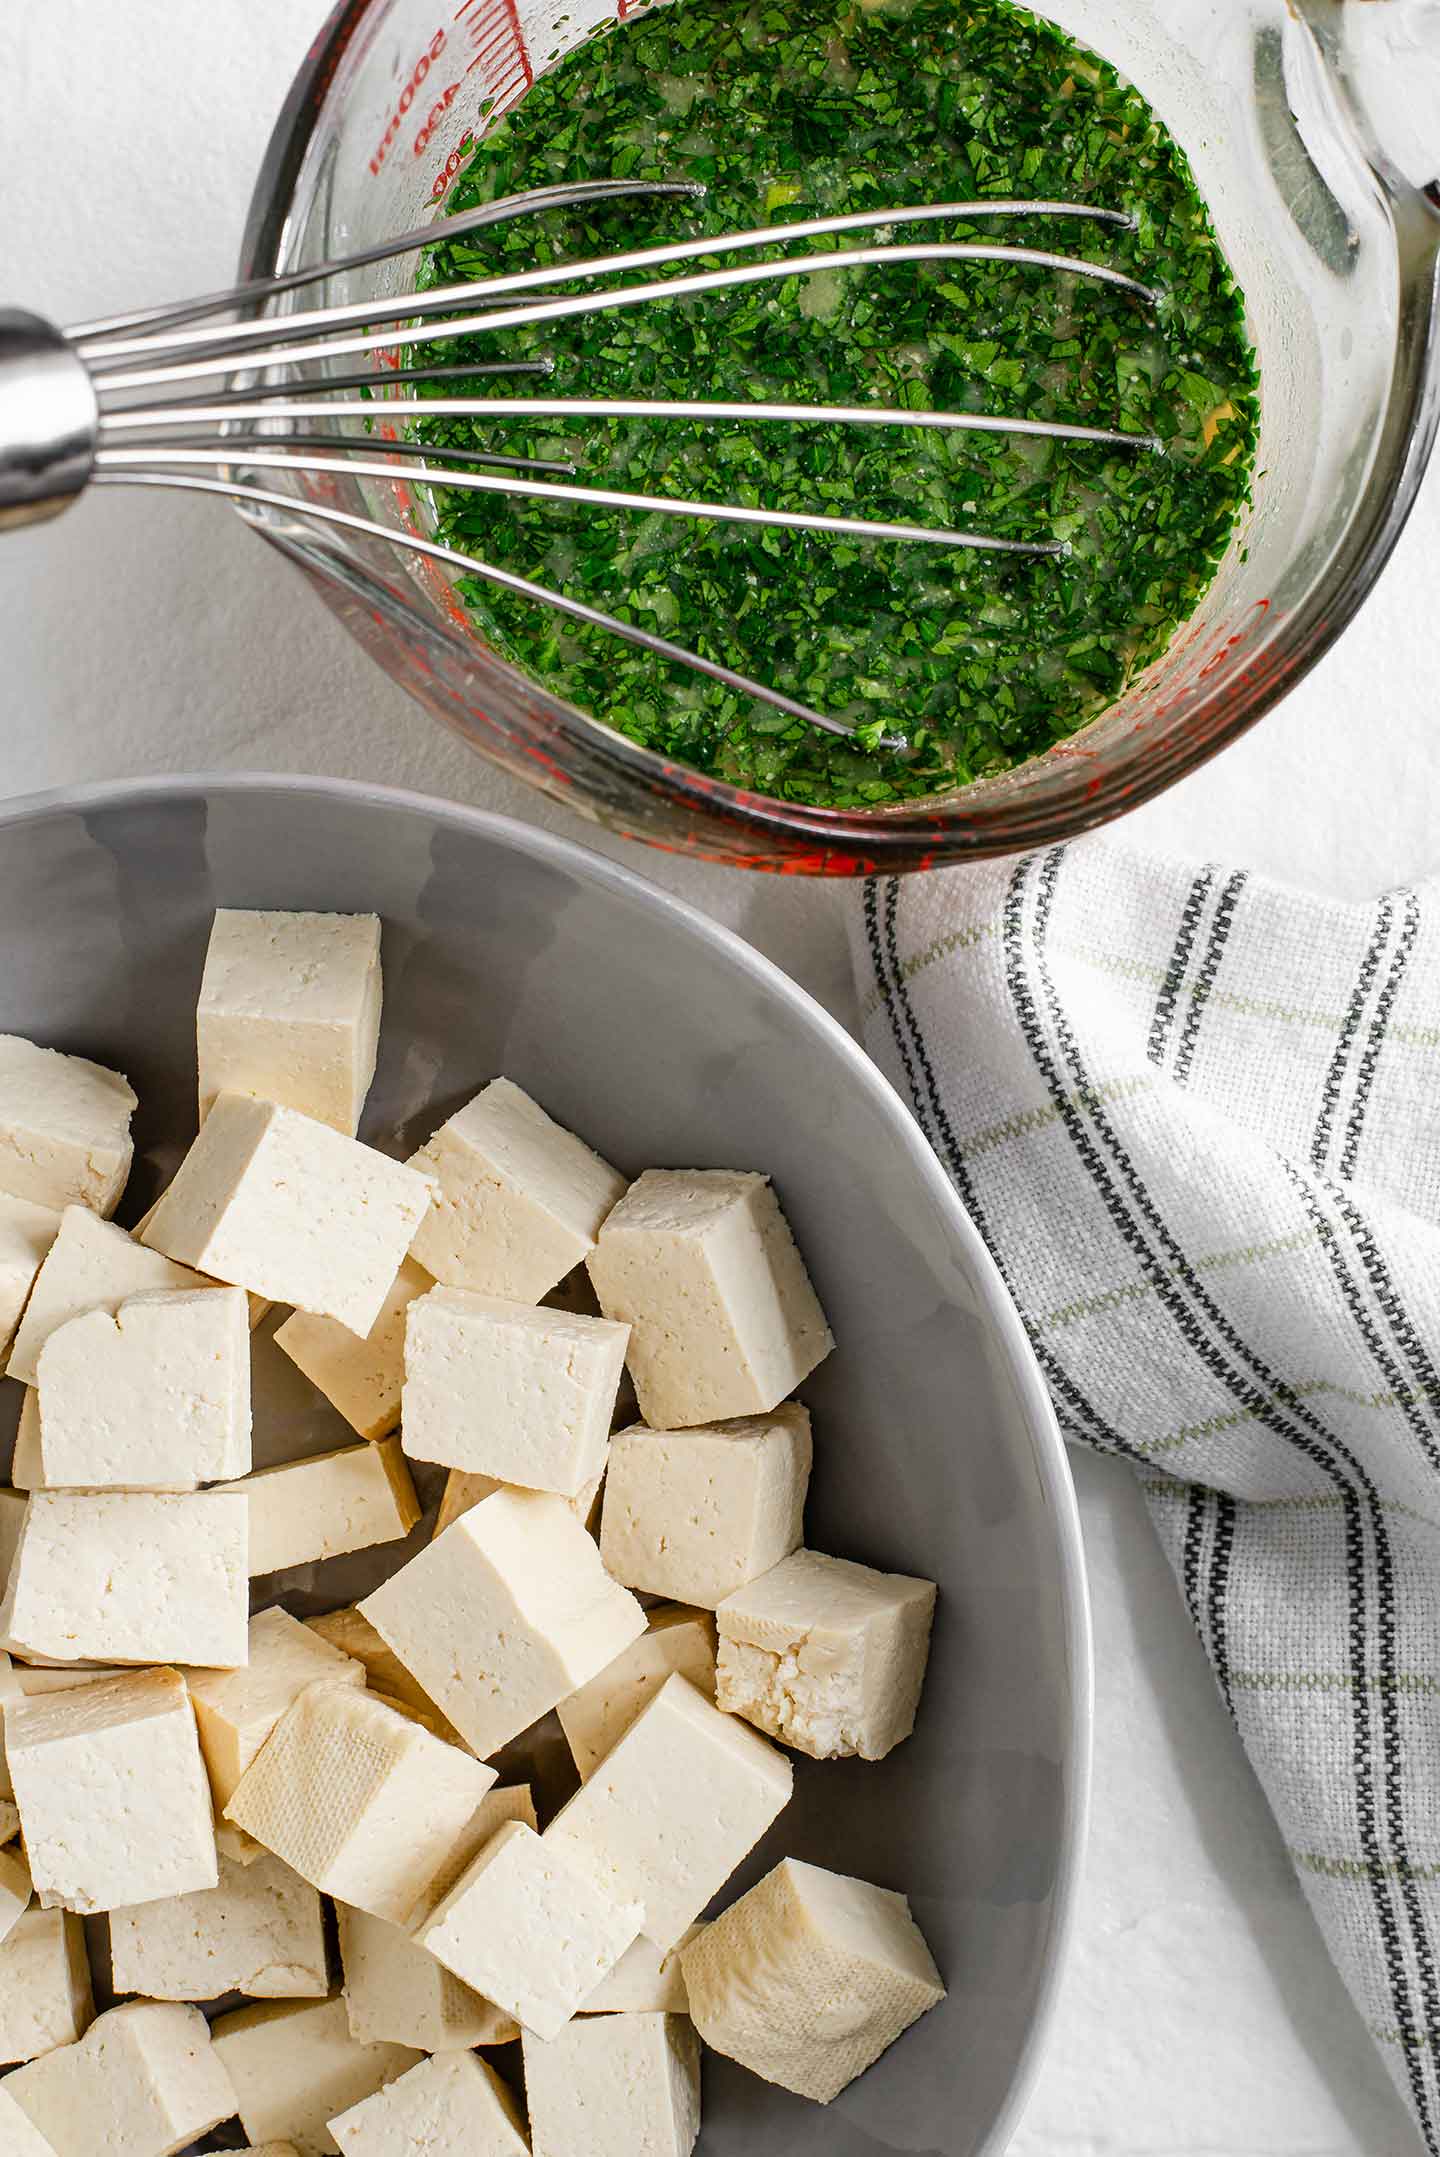 Top down view of tofu sliced into cubes and the feta dressing prepared in a small glass dish with a whisk.